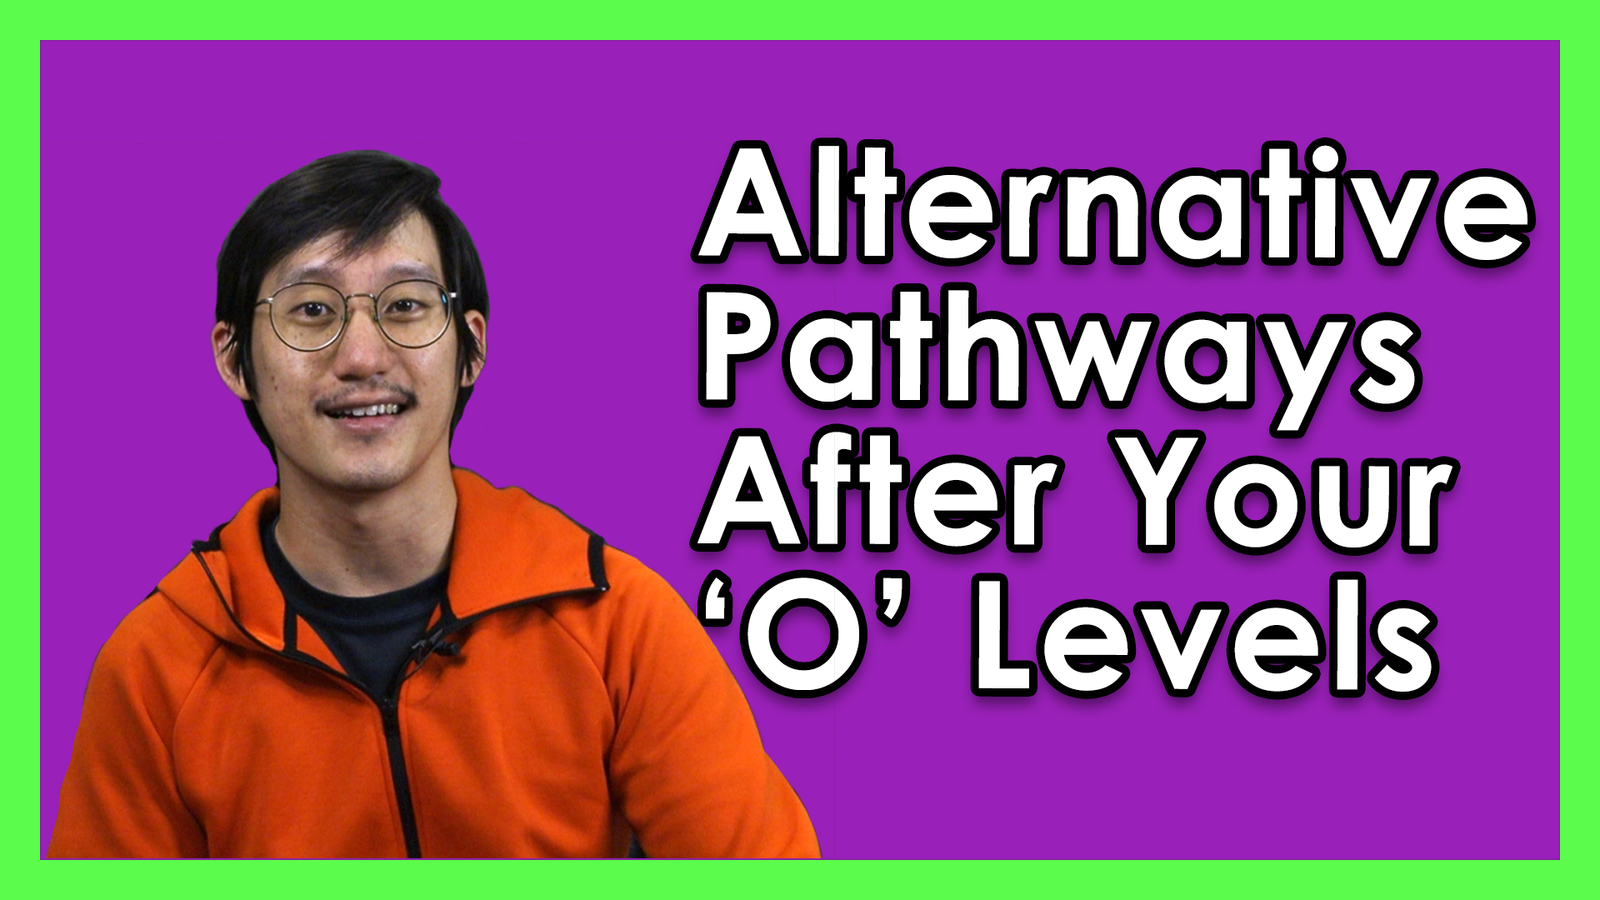 Where to After Secondary School? - Foundation Programmes as Alternative Pathways After GCE 'O' Levels